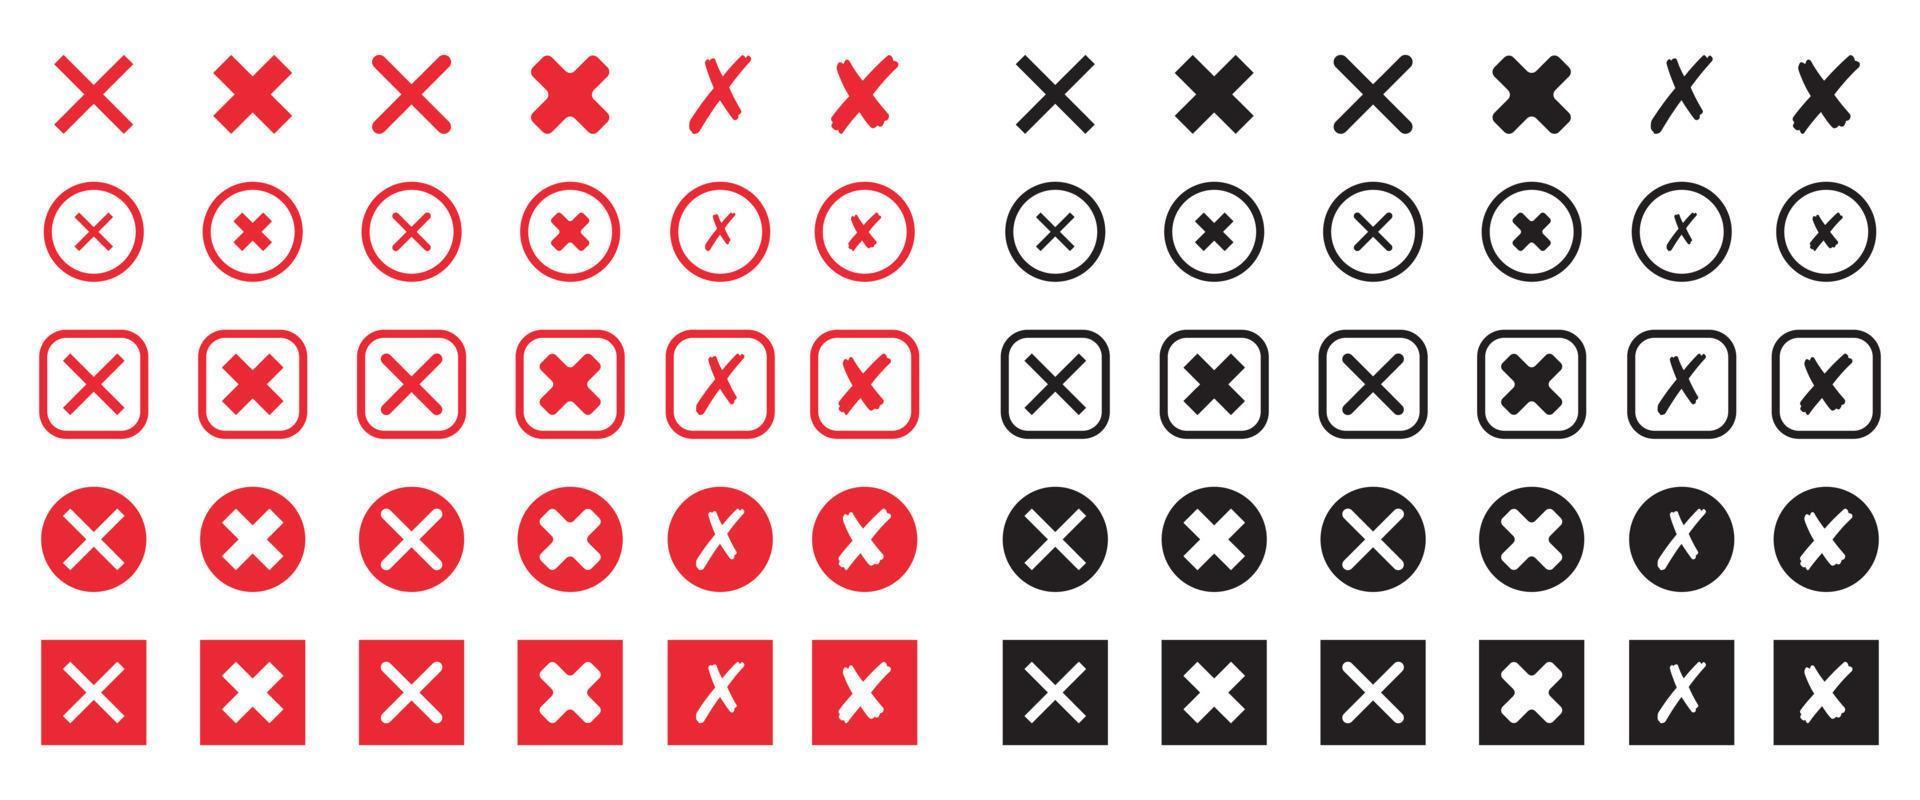 Set of red and black cross icon. X mark symbol in flat style. Vector